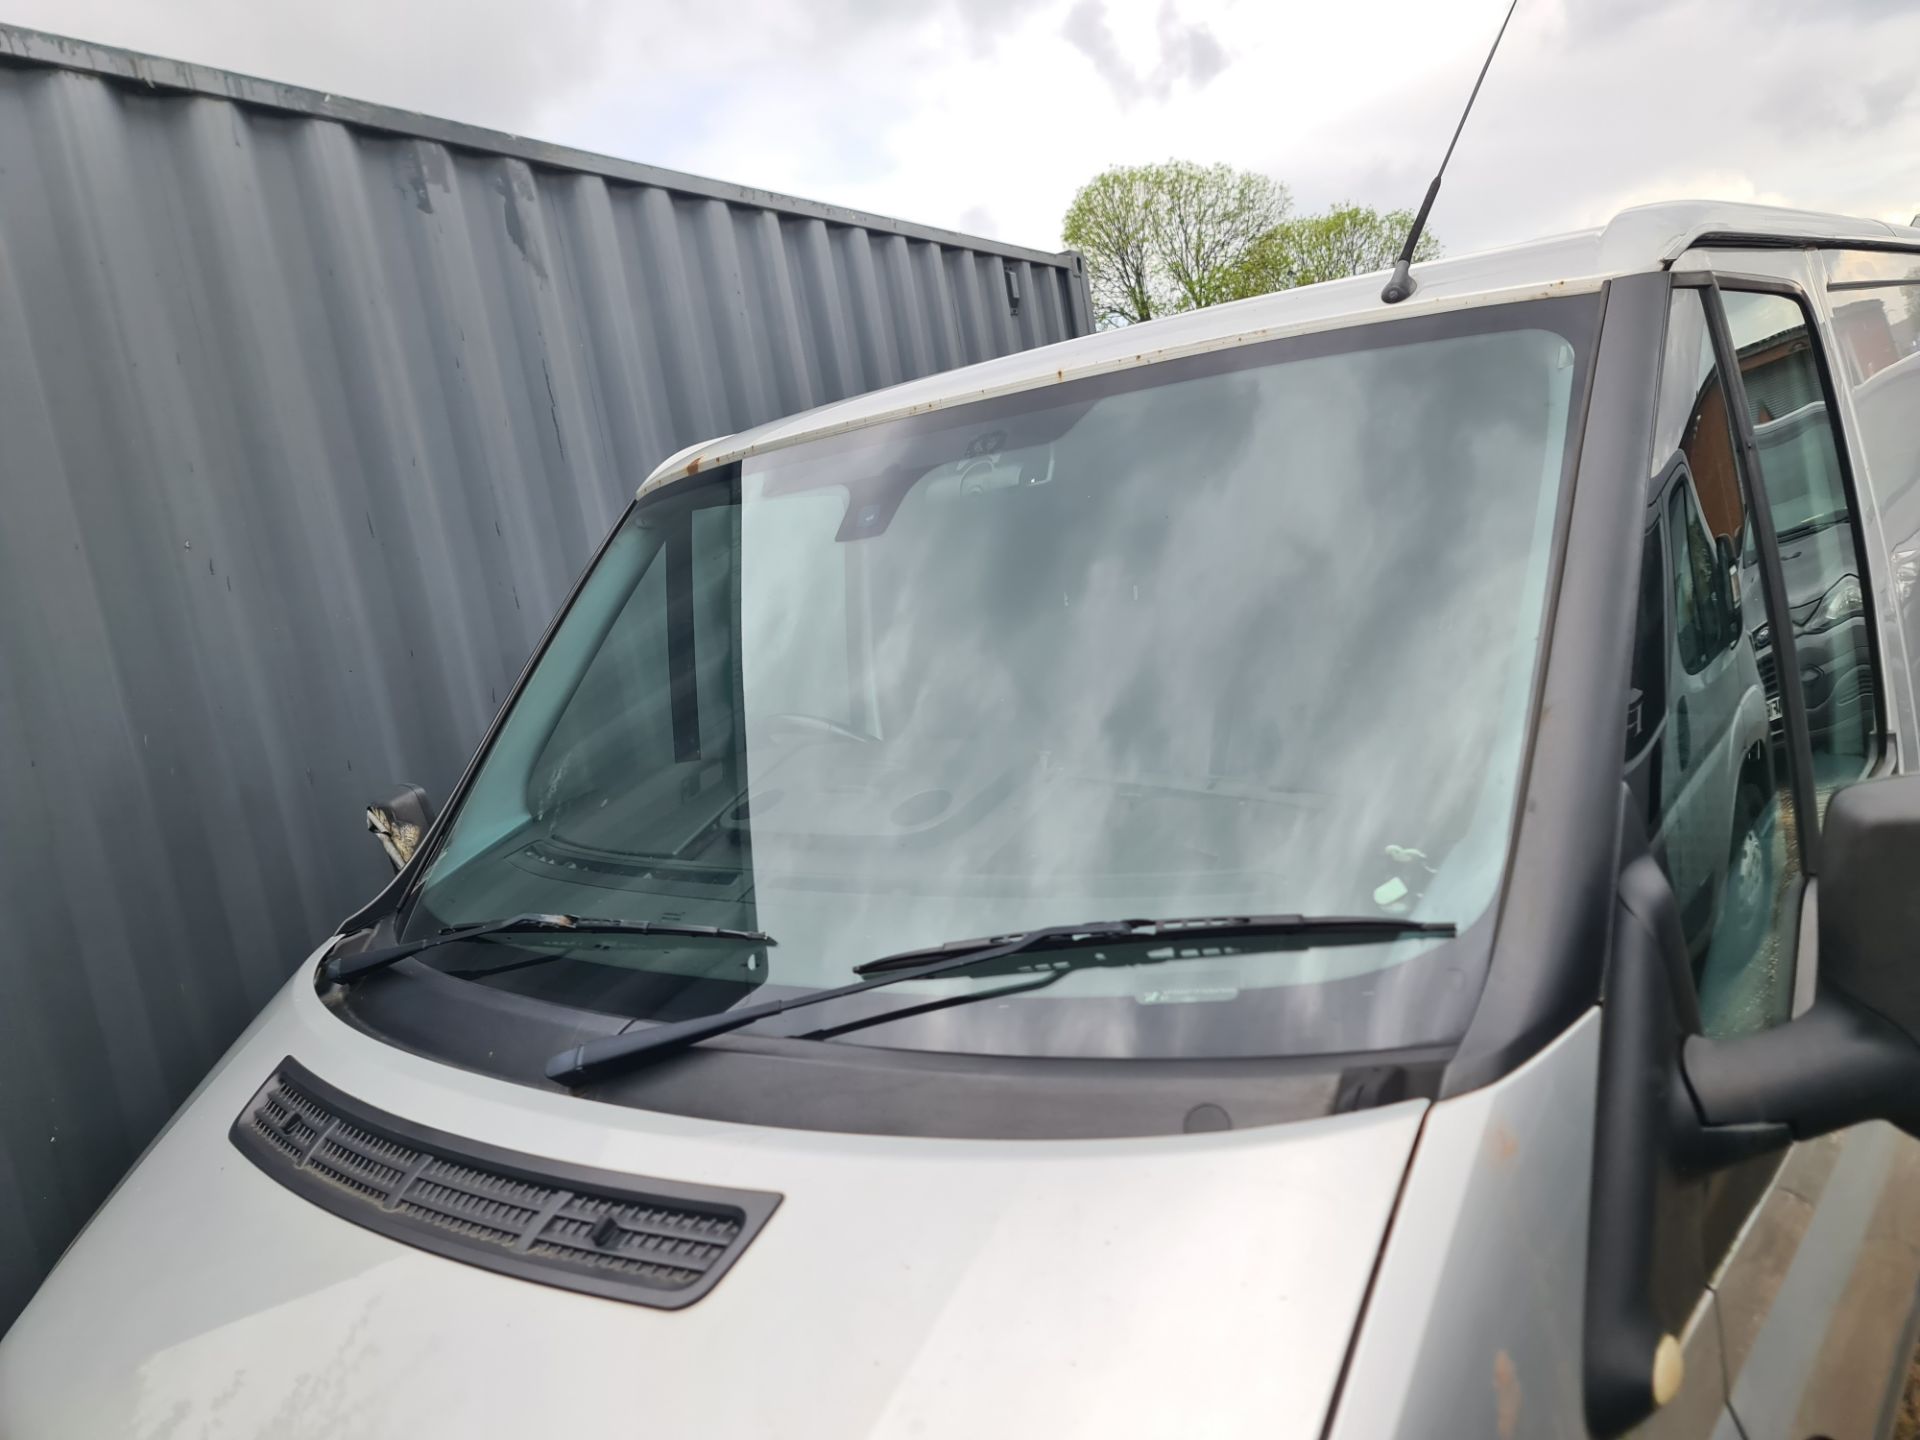 2012 Ford Transit 125 T280 Trend FWD panel van - Image 10 of 19